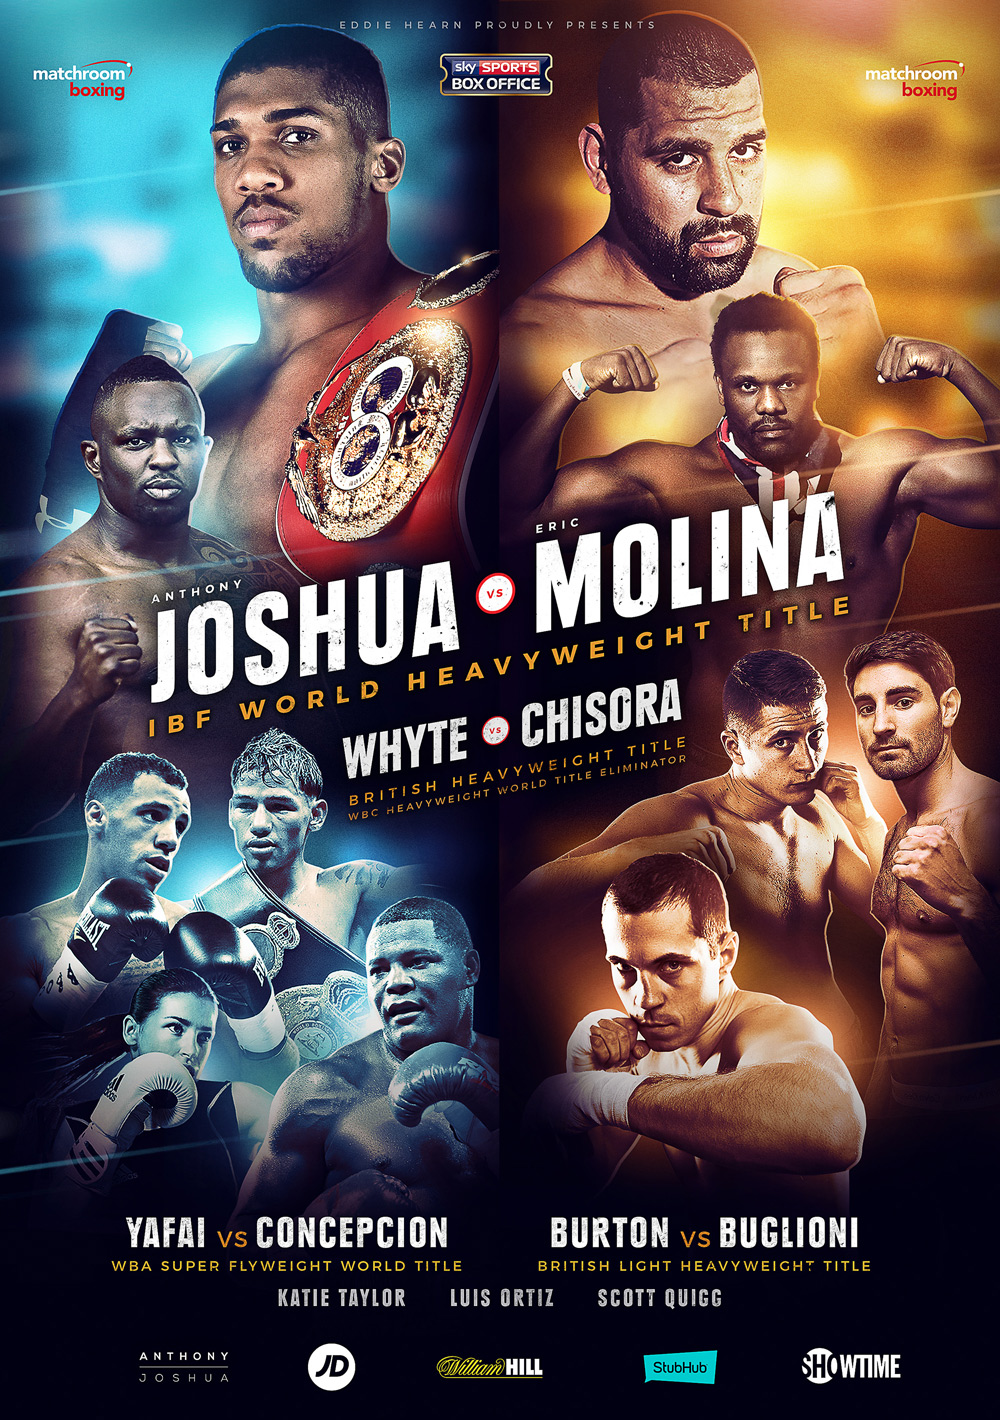 poster for anthony joshua's ibf heavyweight title defence against eric molina